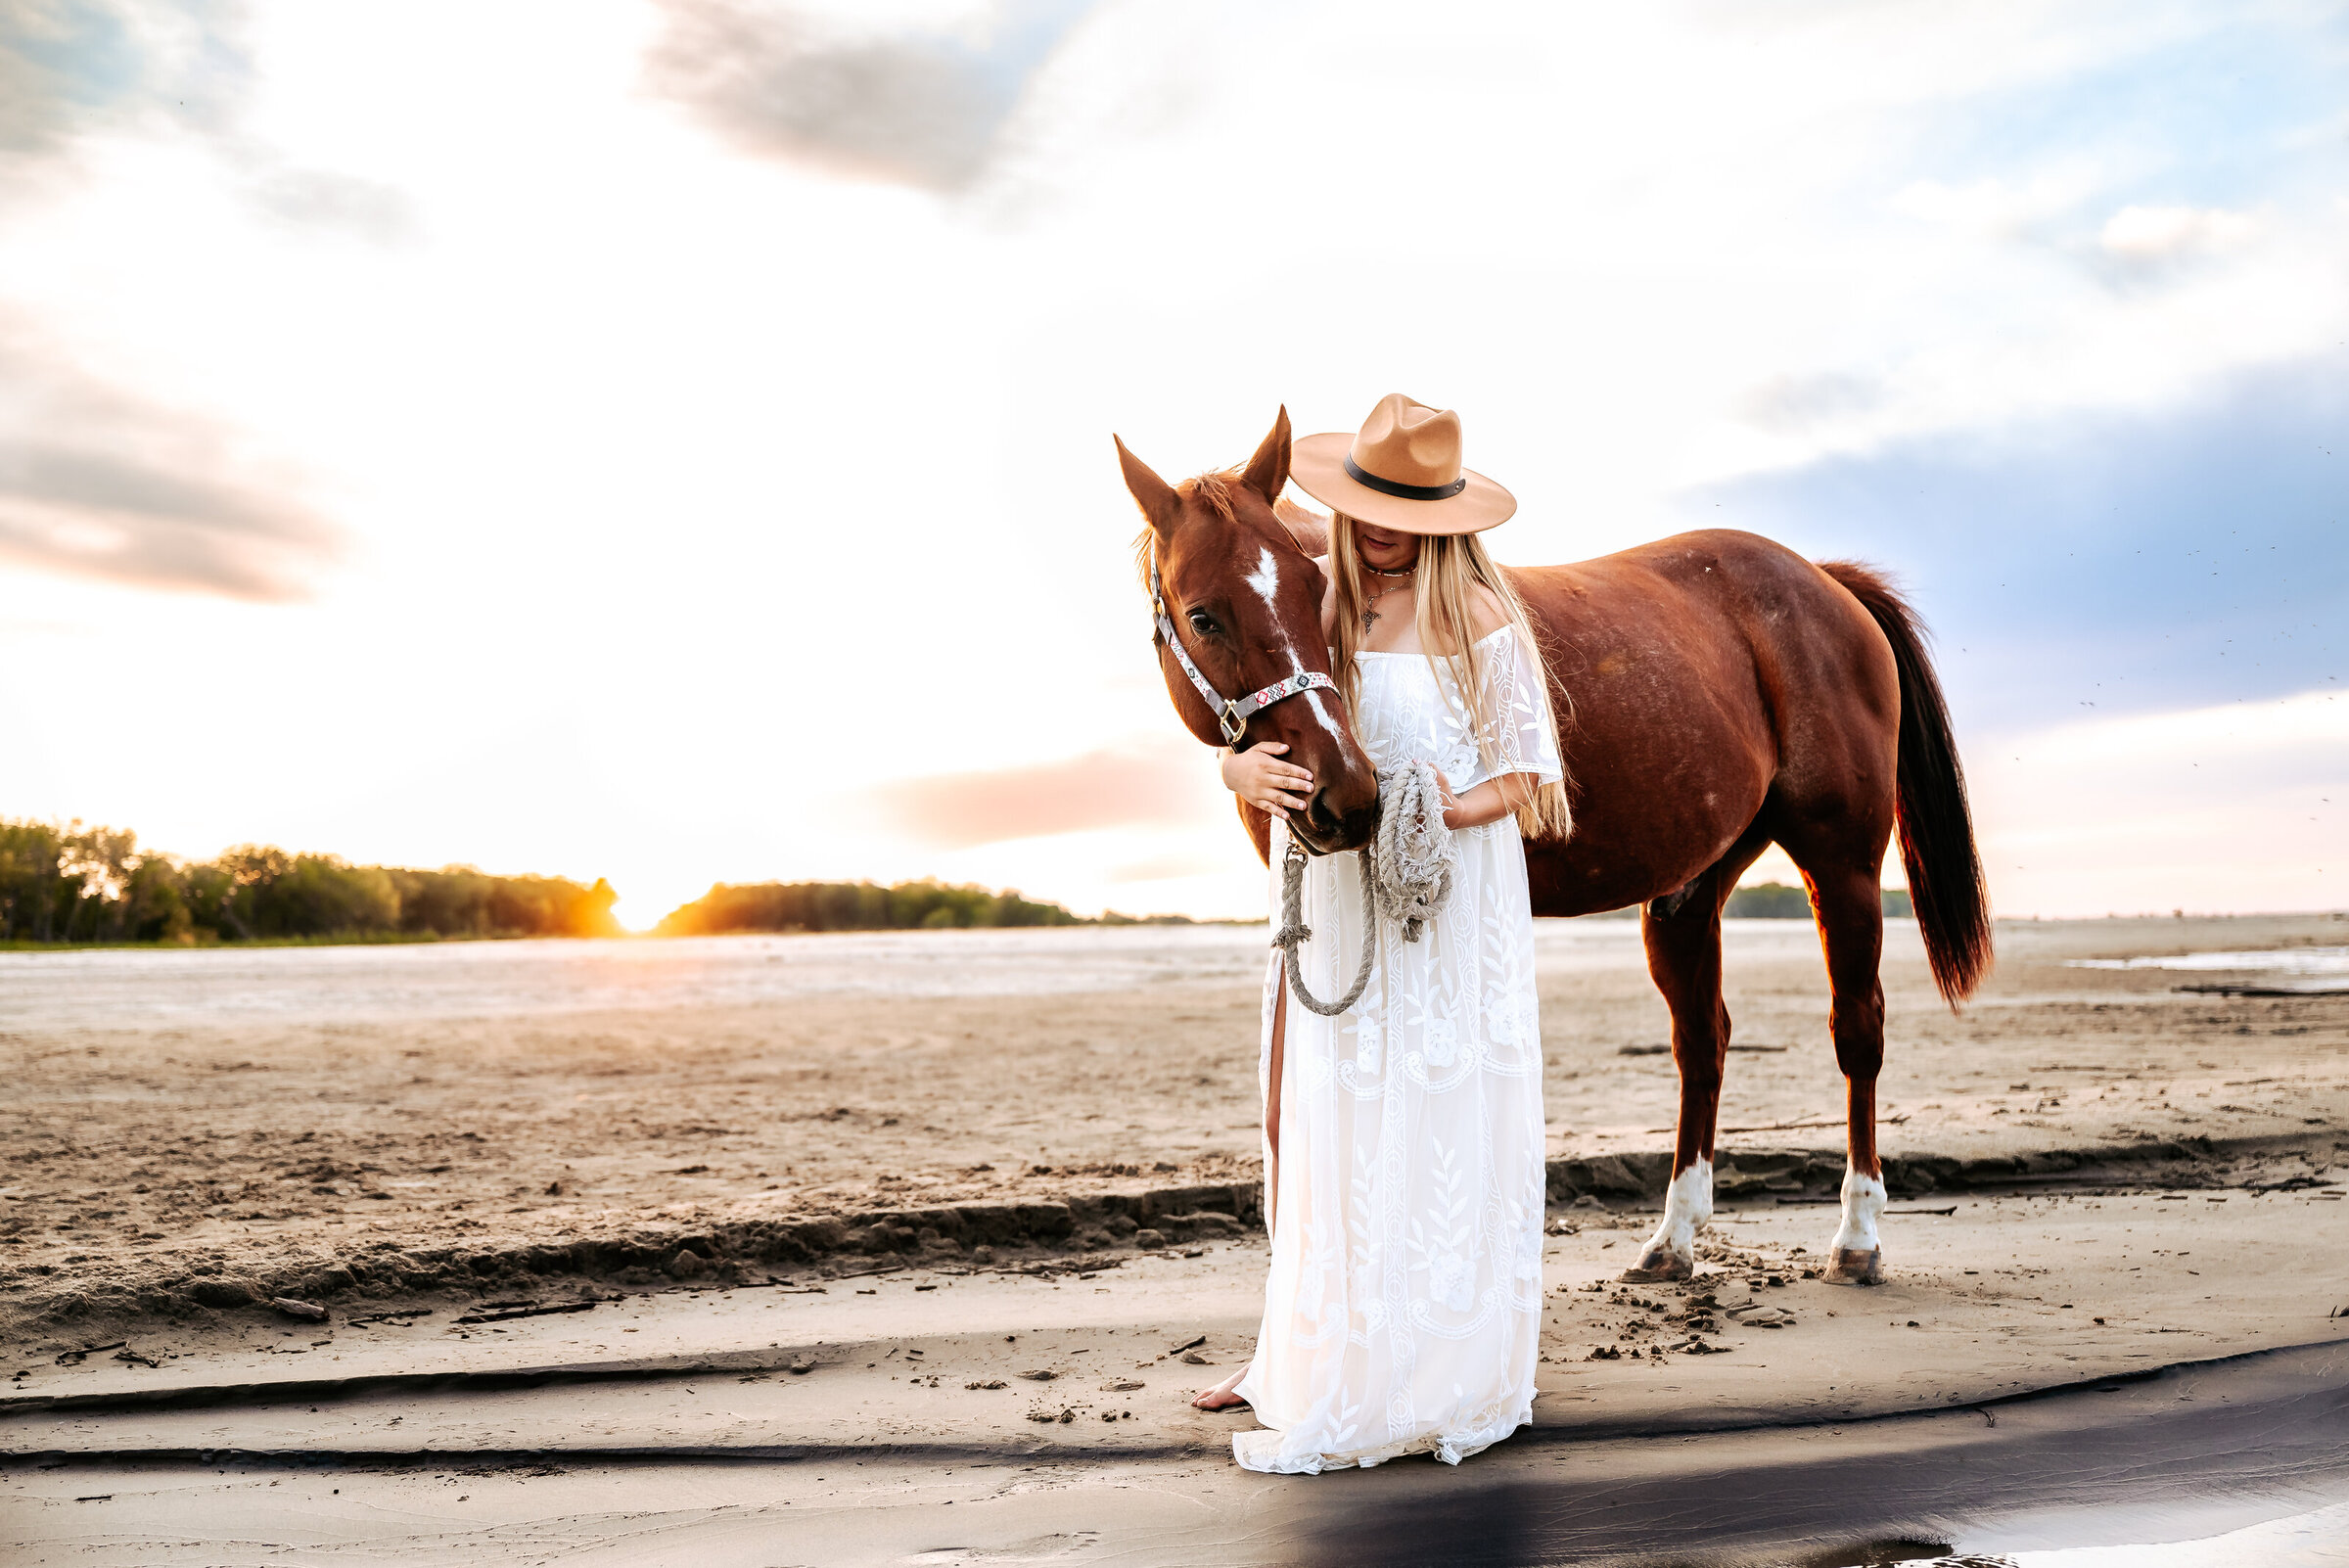 senior poses with horse on lake beach at sunset